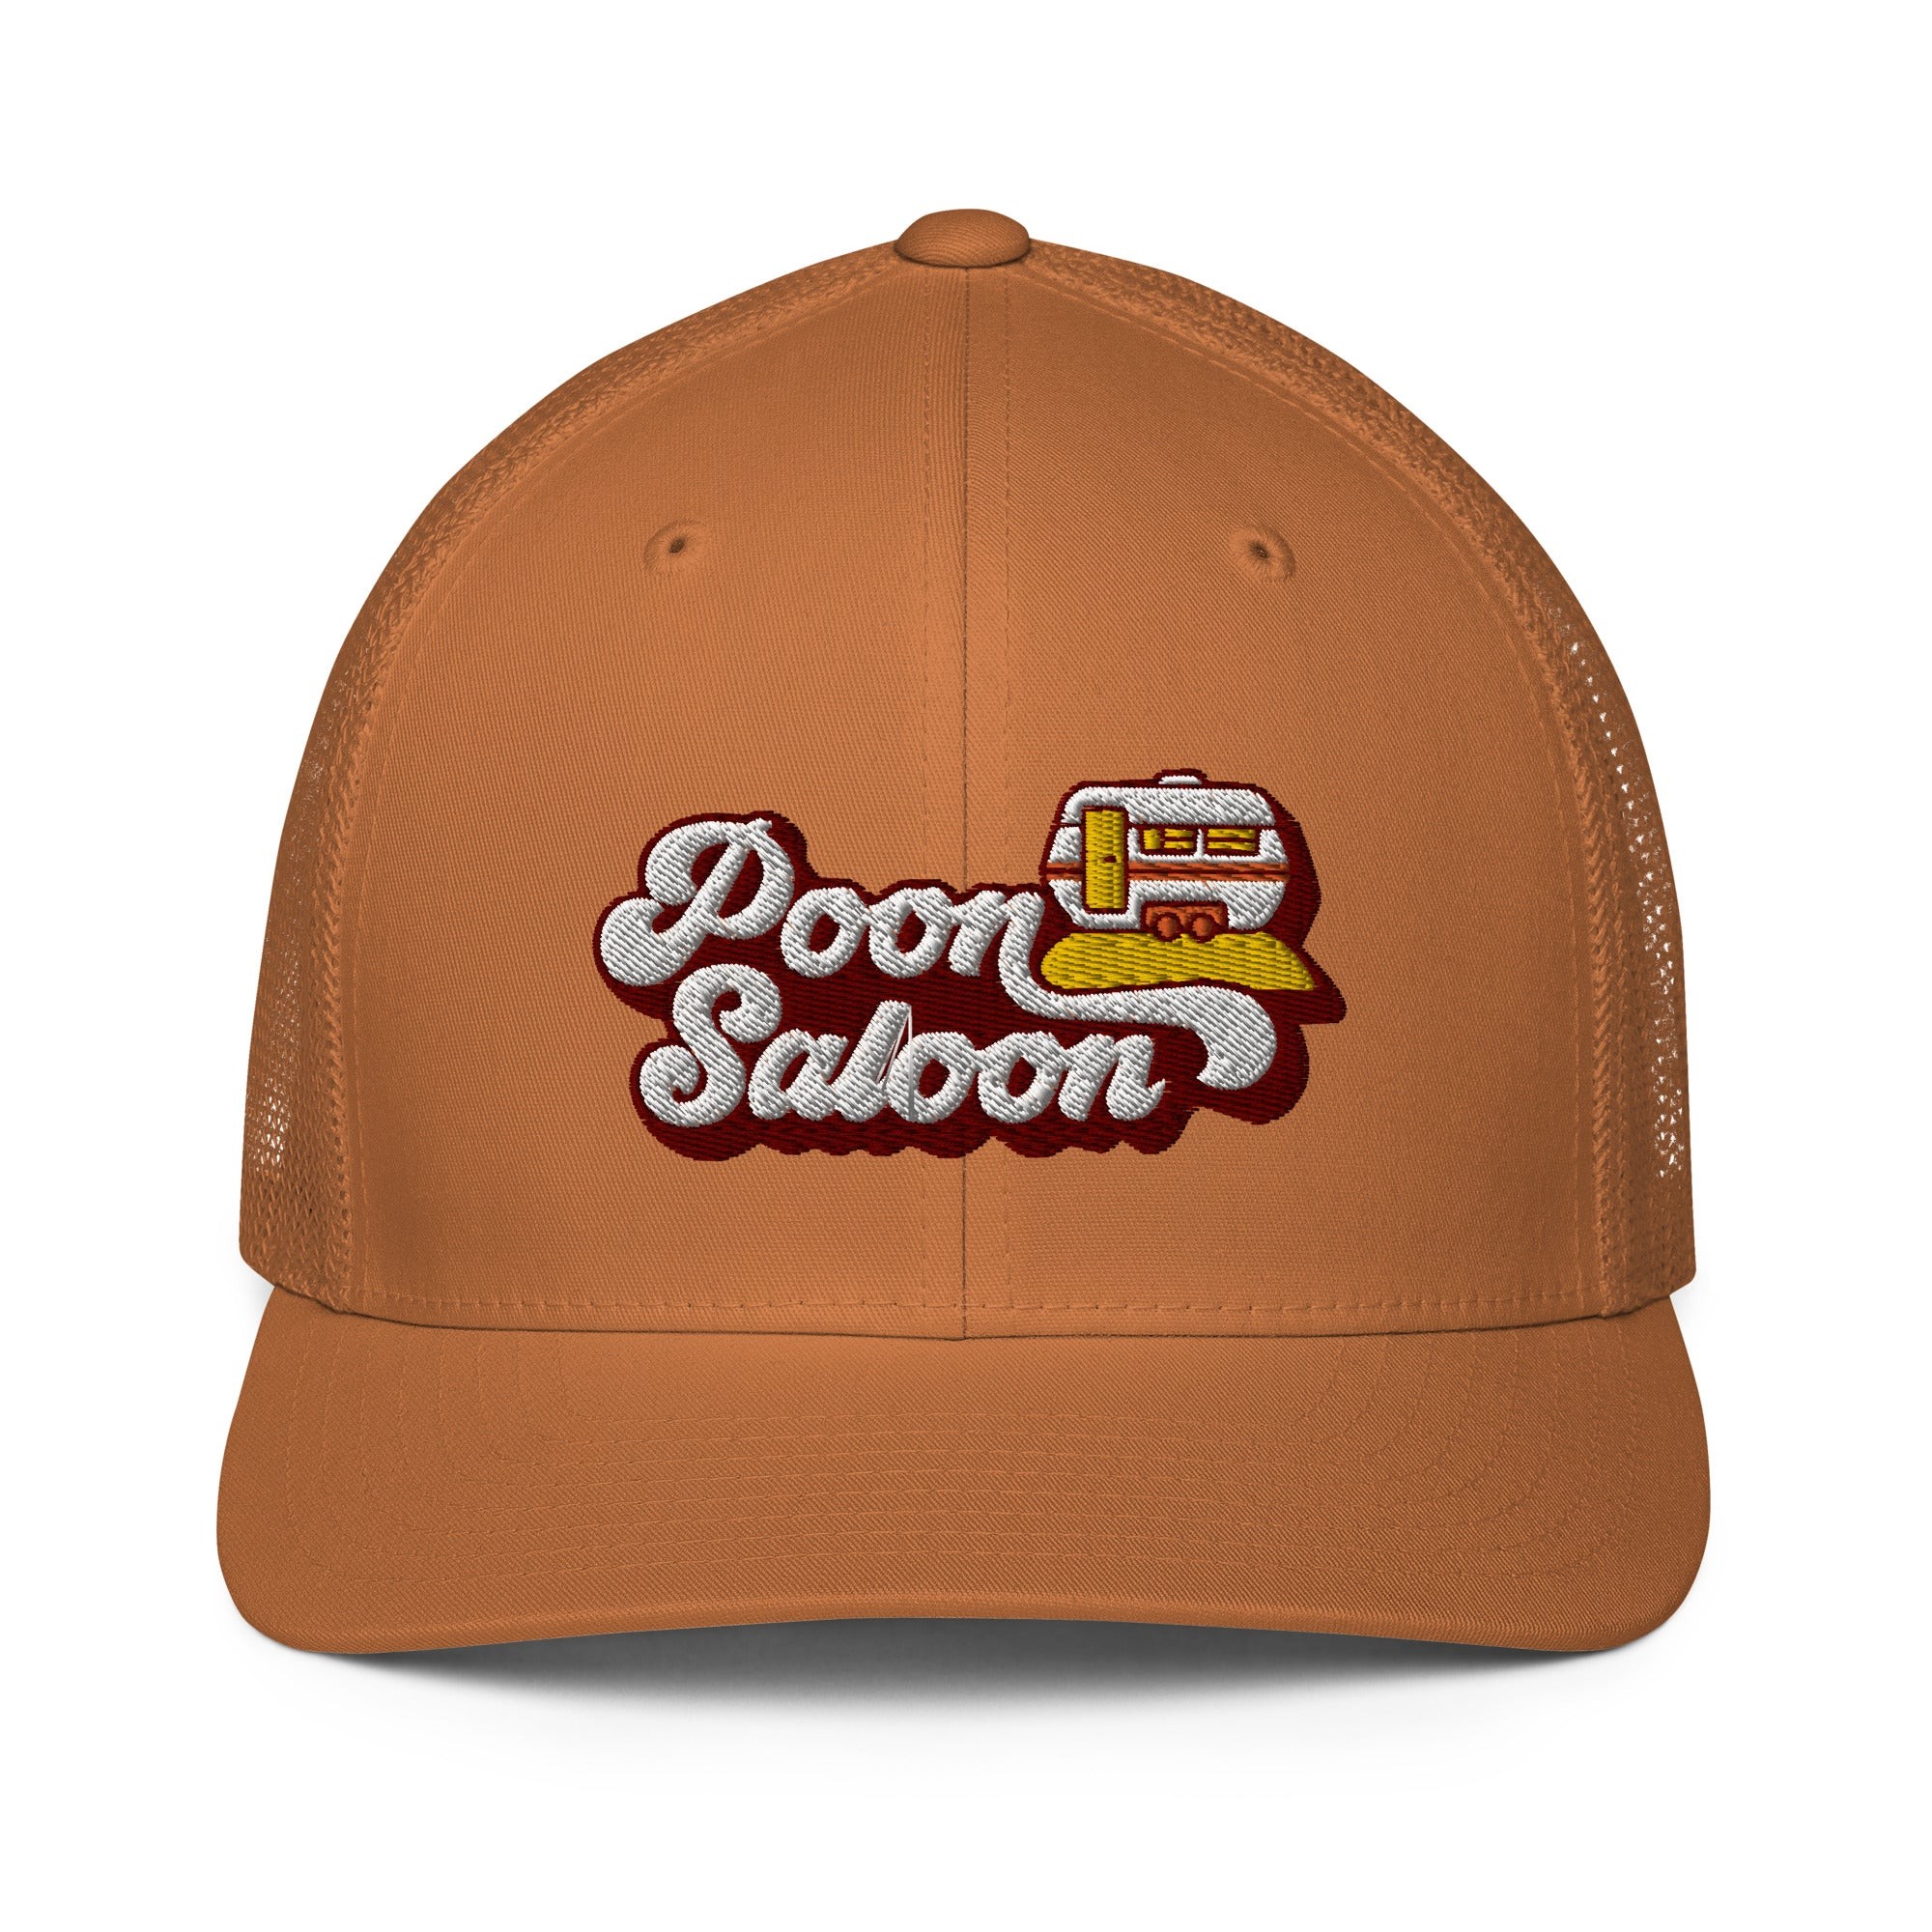 Poon Saloon Embroidered Trucker Hat